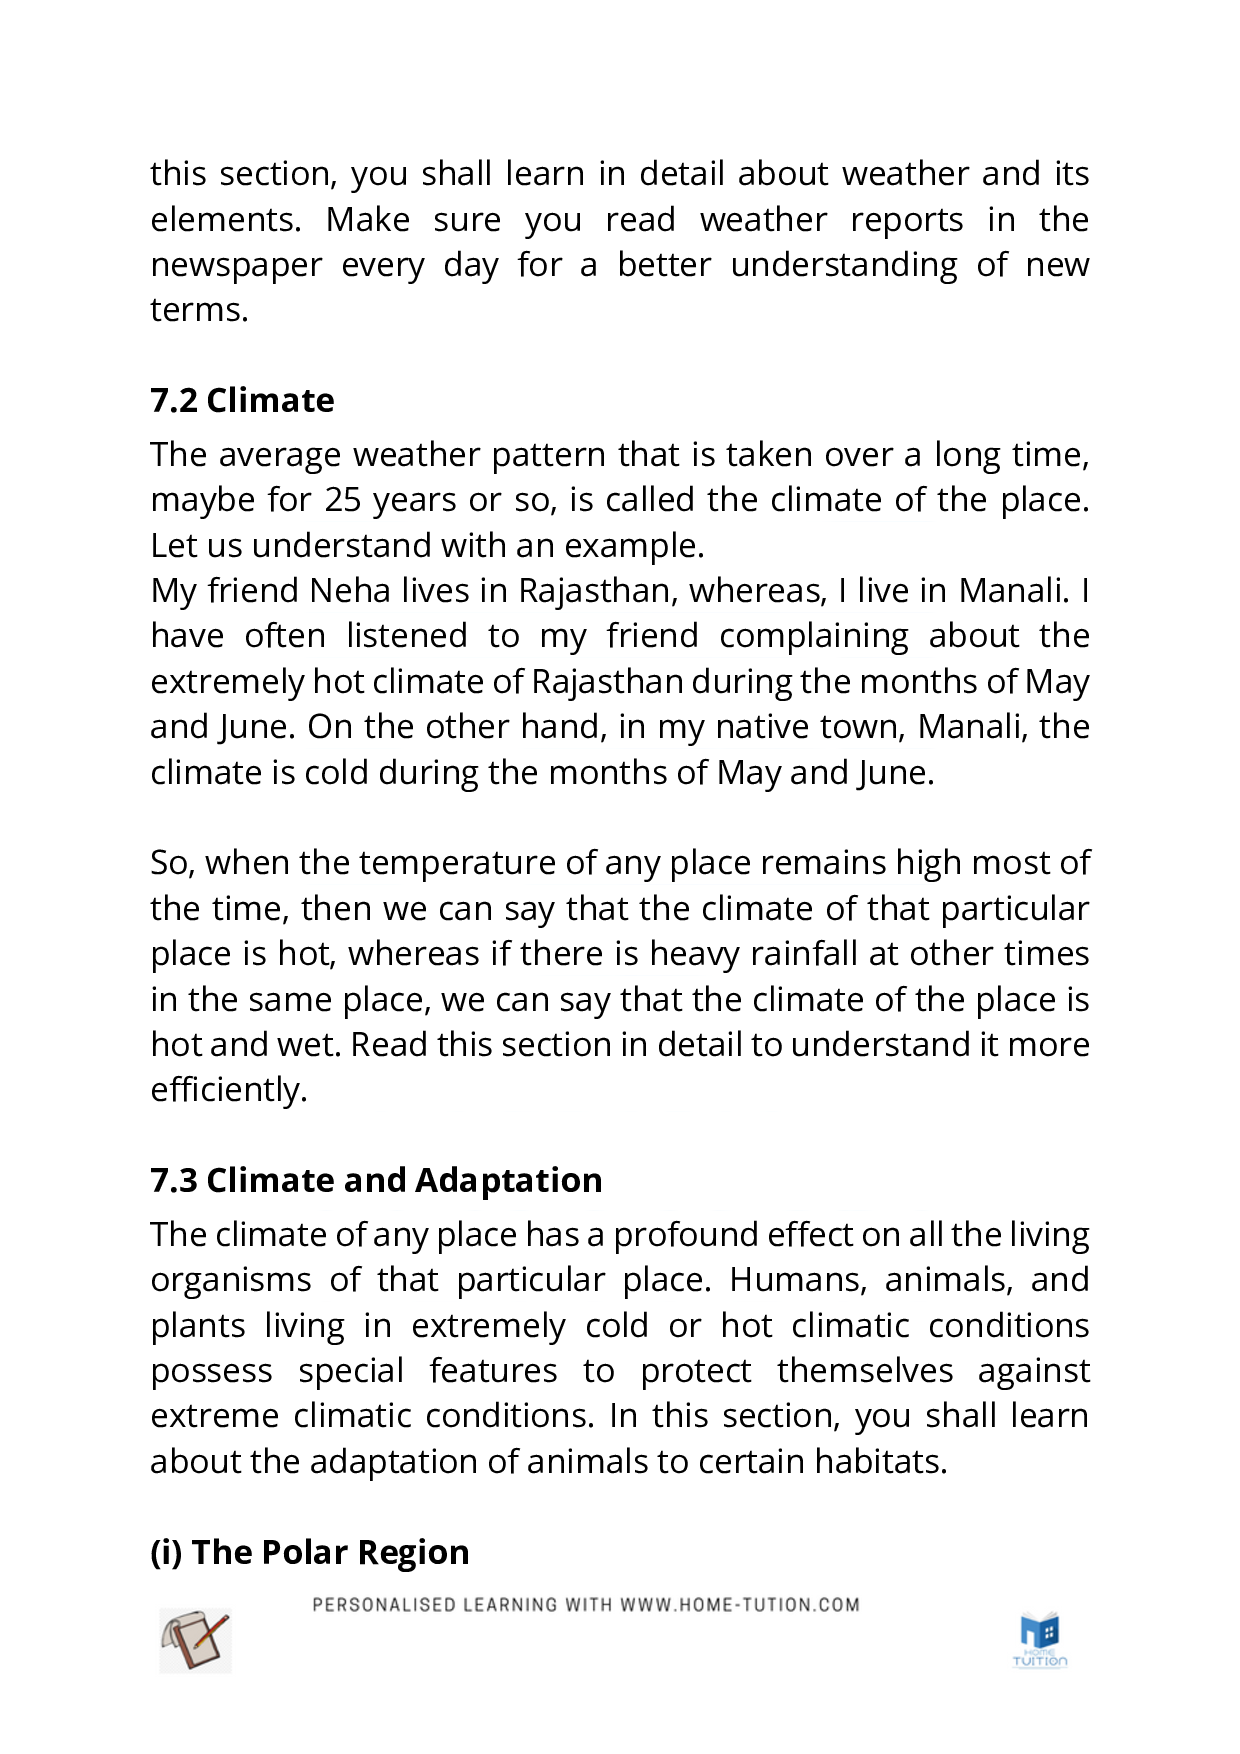 Class 7 Science Chapter 7 – Weather, Climate and Adaptations of Animals to Climate